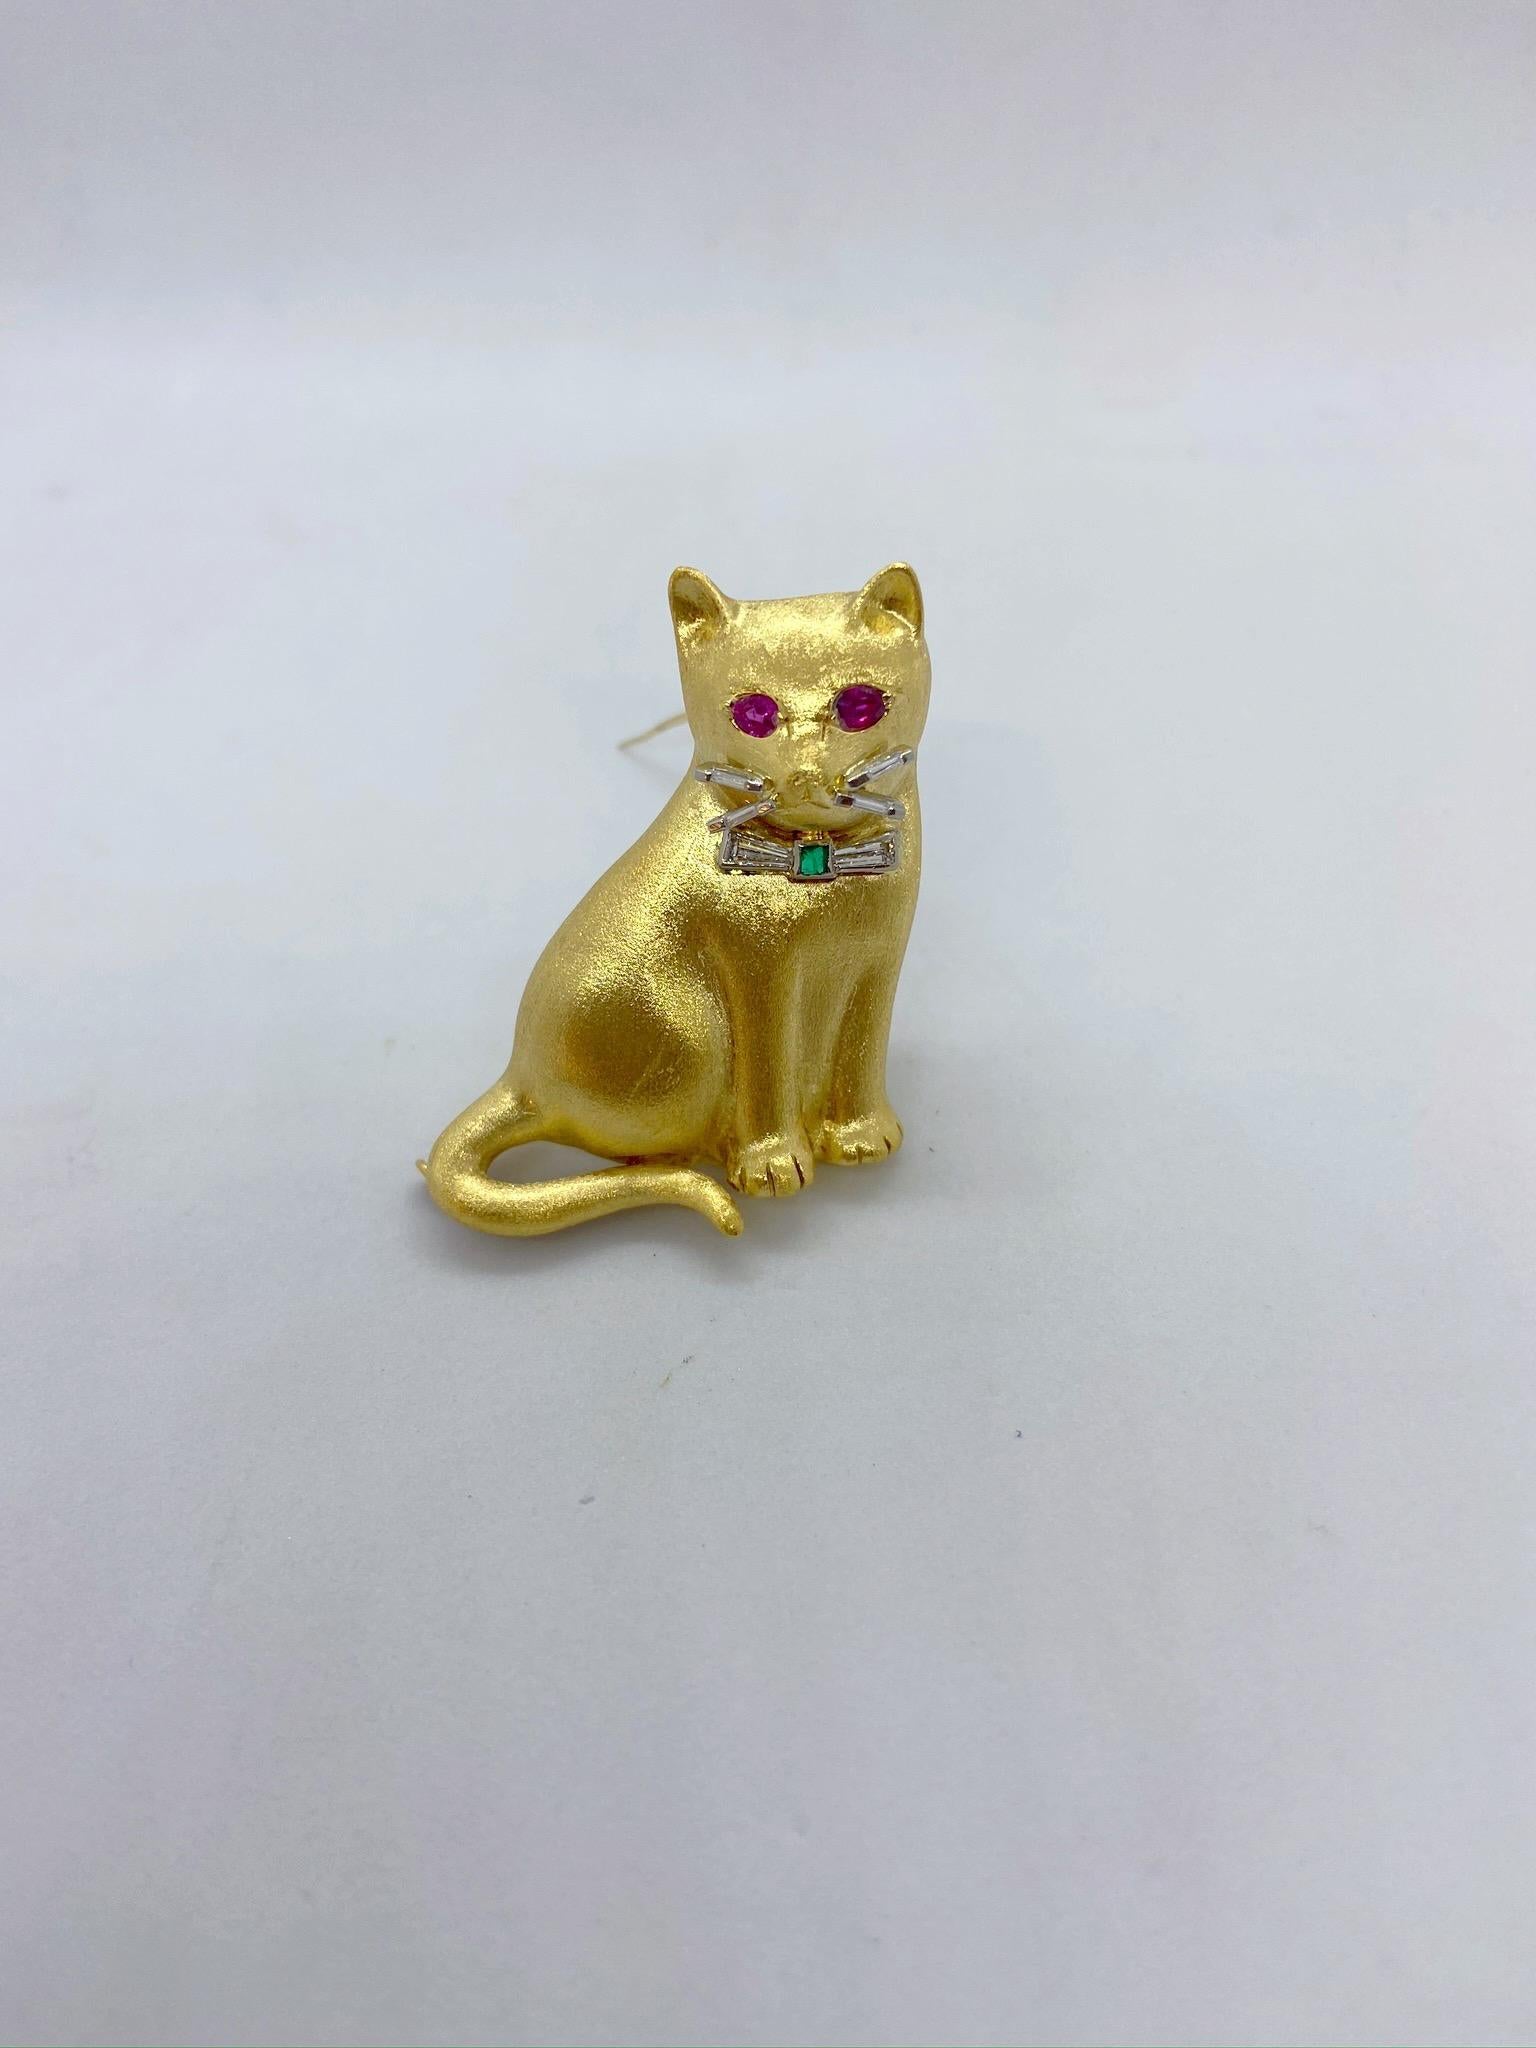 This magnificent 18 karat yellow gold cat brooch has a smooth satin finish, magically looking like fur. The adorable cat's features are uniquely designed with ruby eyes, and baguette diamond whiskers. His bow tie is set with a square emerald and